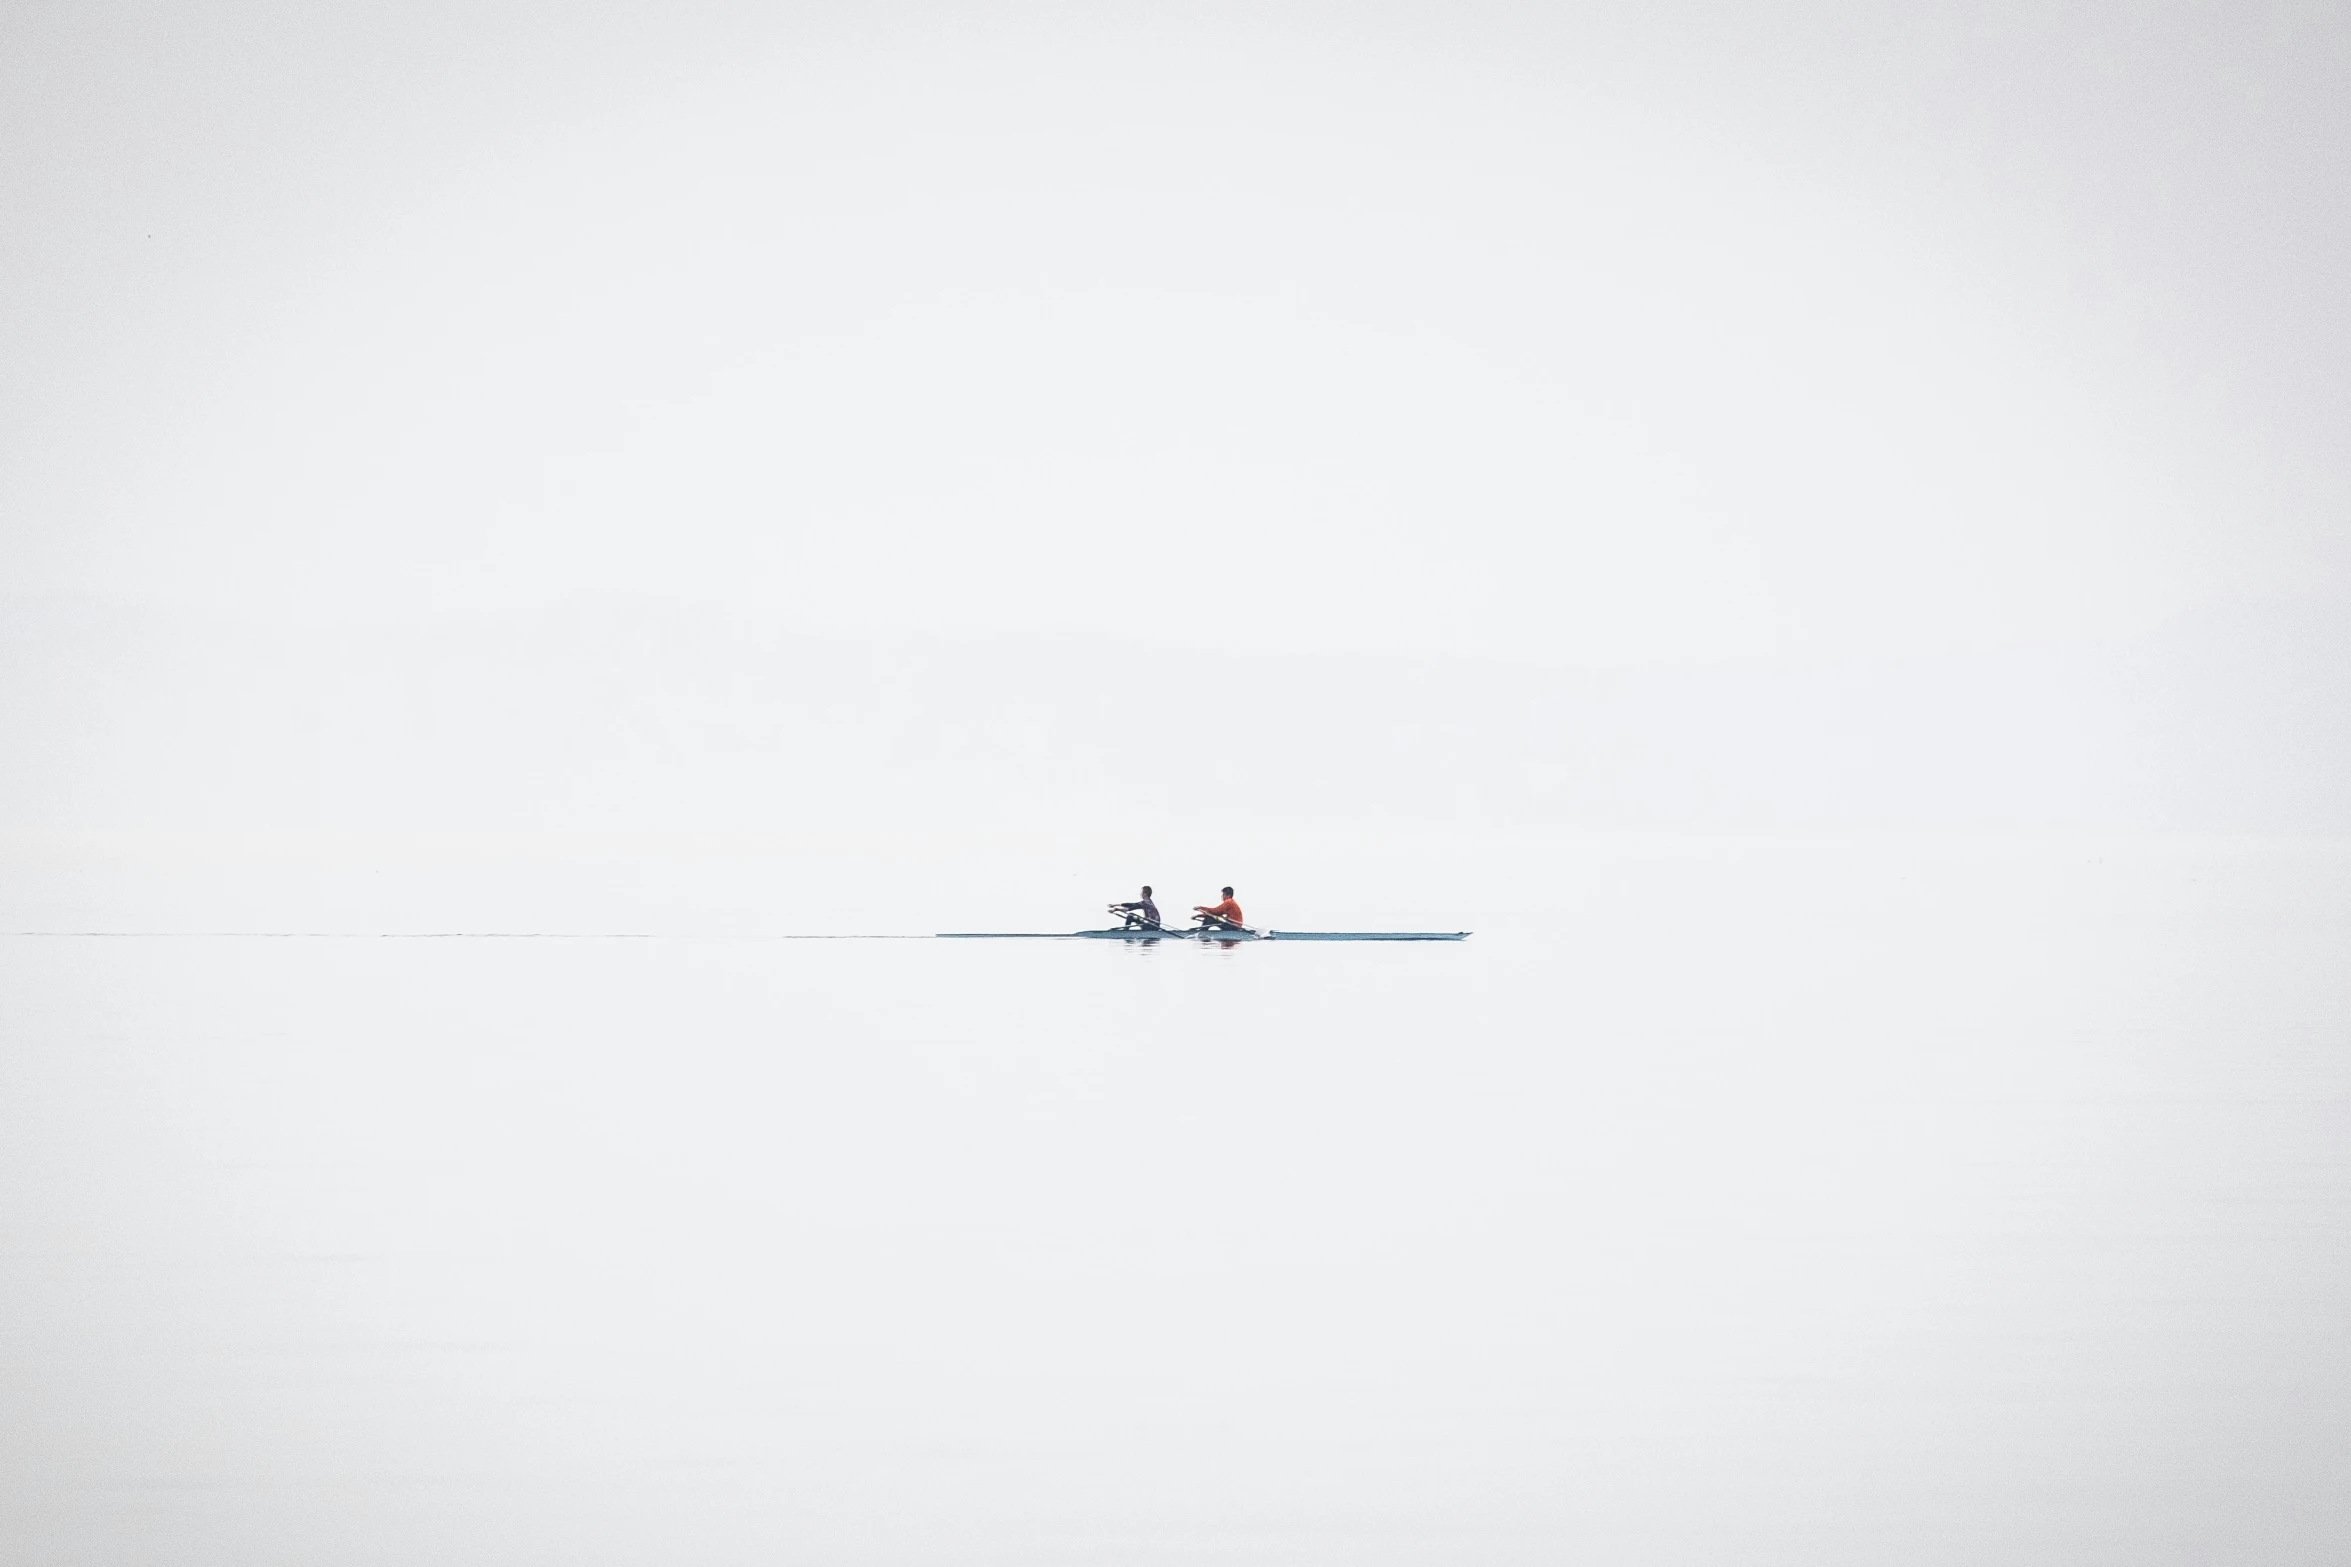 two people in water skis are standing near the shore